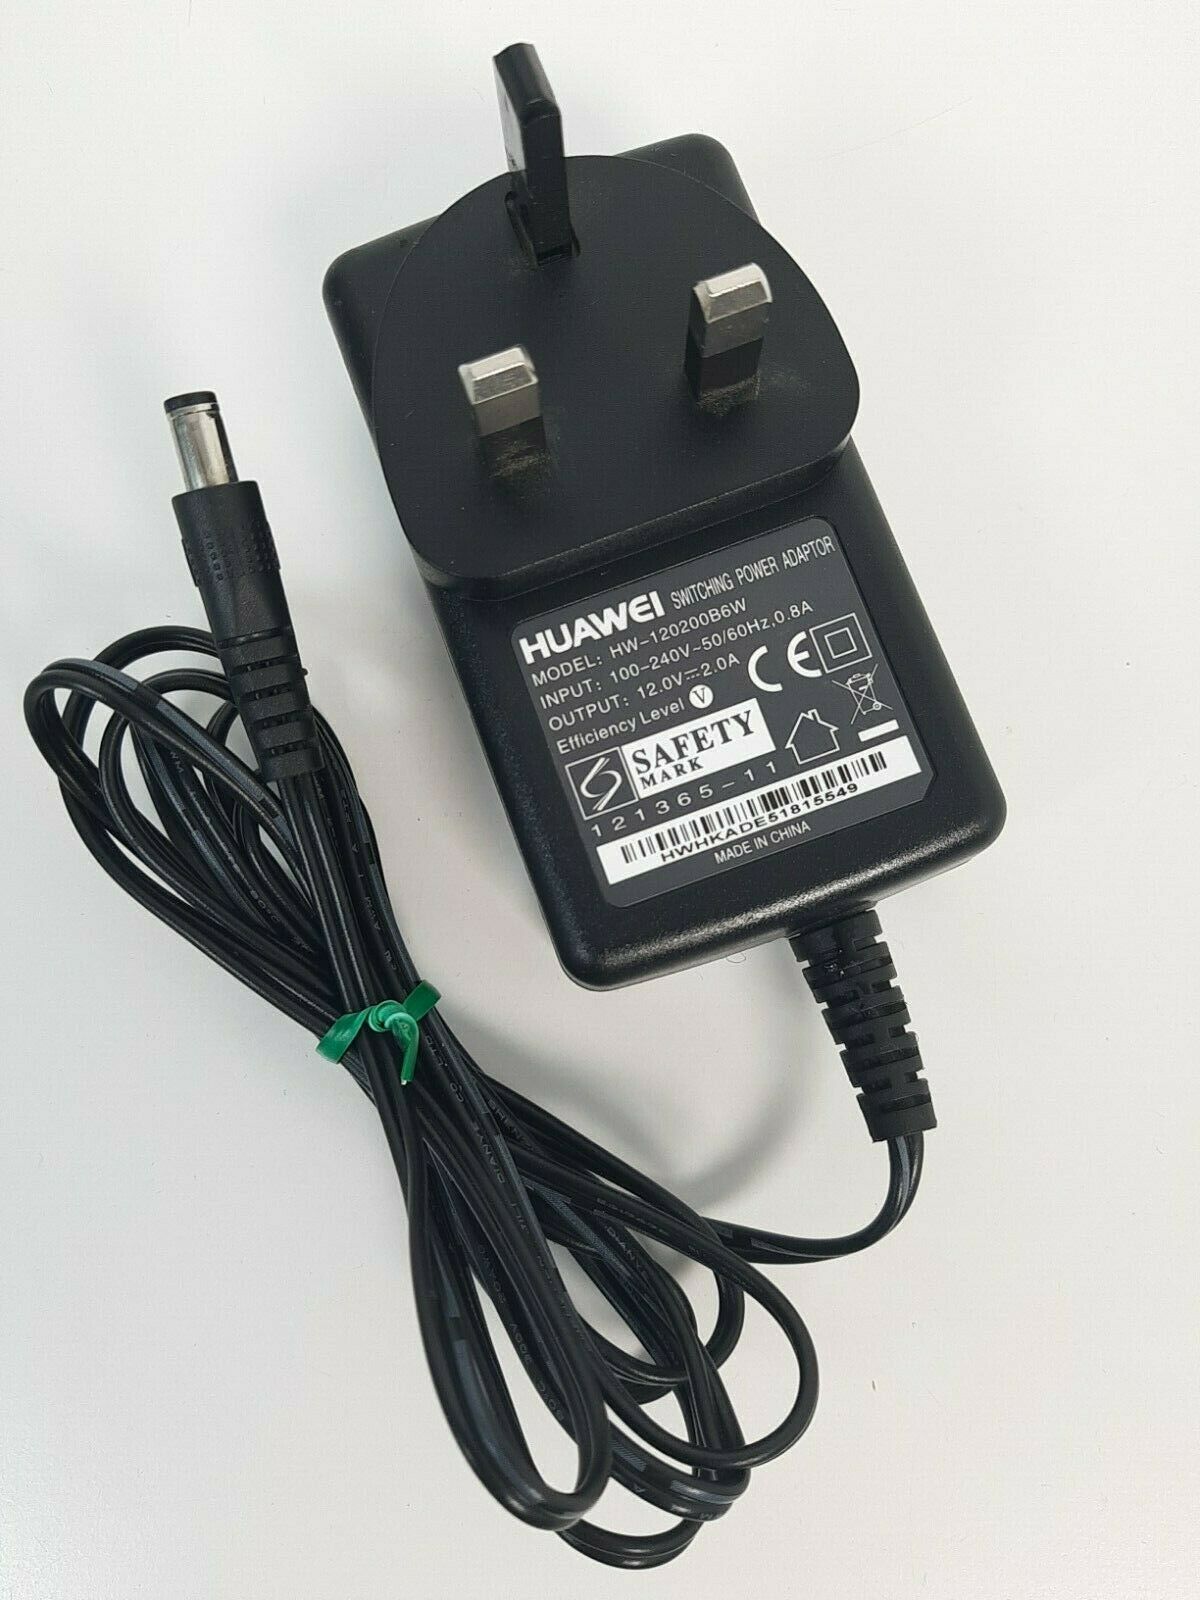 Genuine Huawei 12V 2A HW-120200B6W Switching Power Supply Mains Adapter UK Plug Features: Powered Cable Length: 2 m